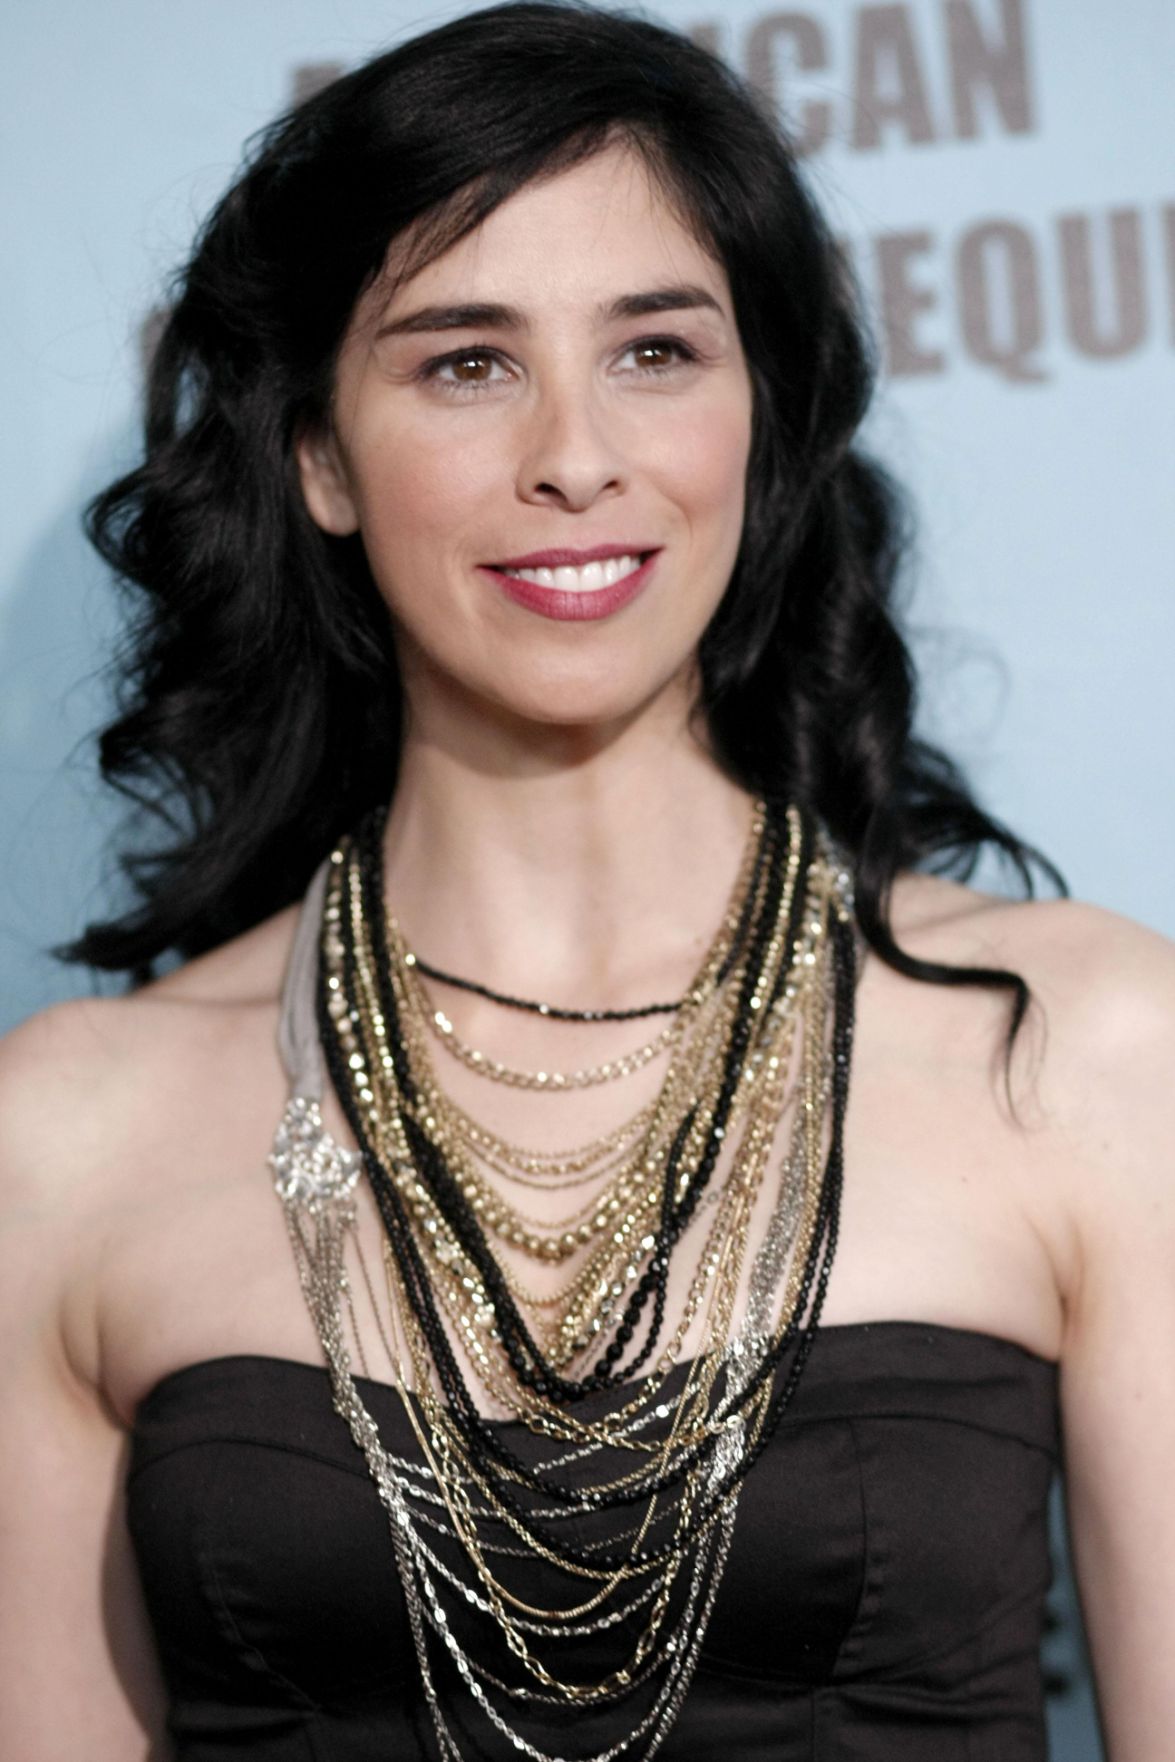 Sarah Silverman's show axed by Comedy Central